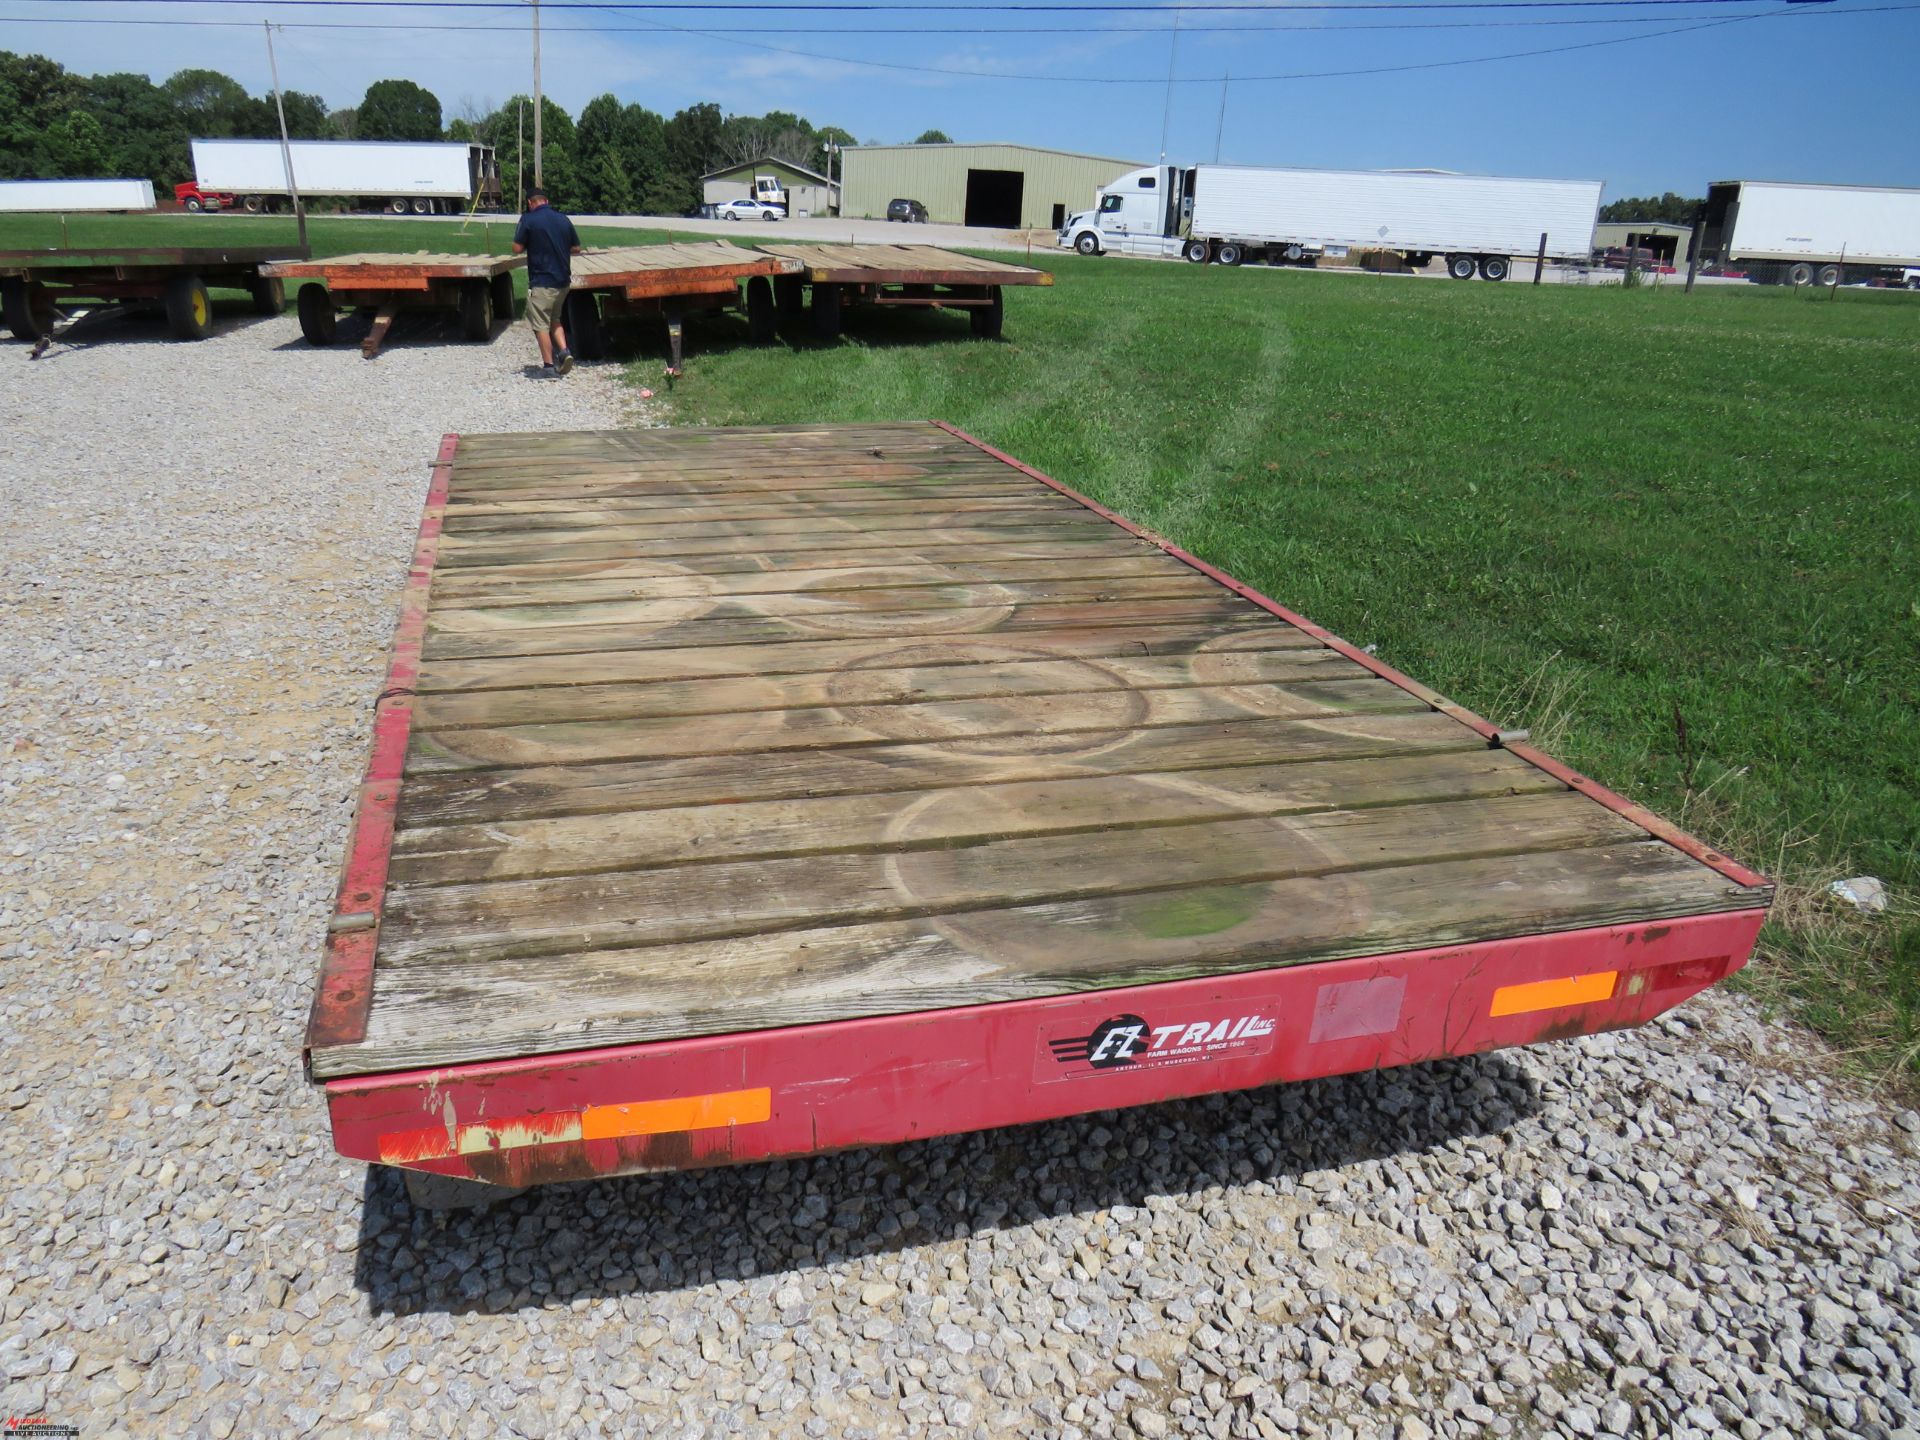 EZ TRAIL FLAT BED TRAILER, 15', PIN HITCH, SMALL TIRES - Image 5 of 6